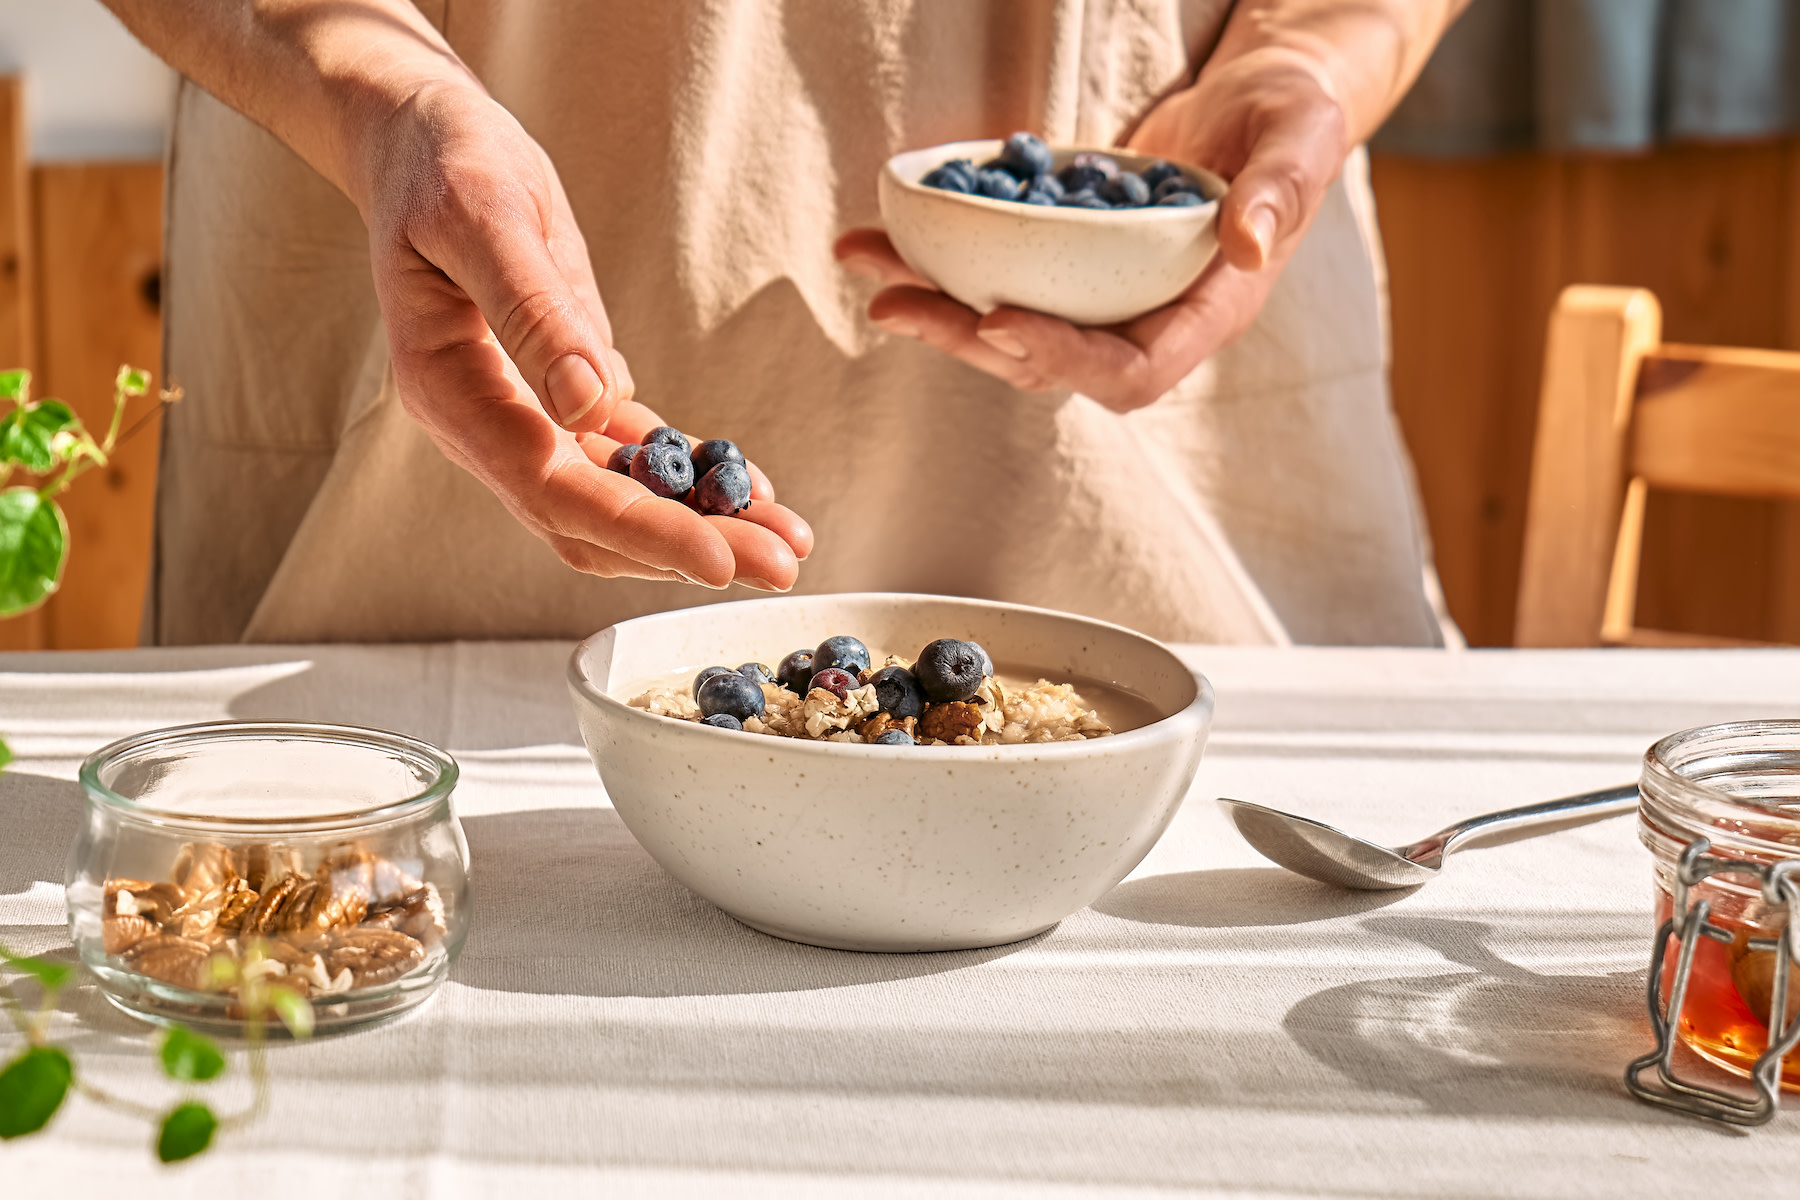 High-Fiber Foods: A person adding blueberries to a bowl of oatmeal.